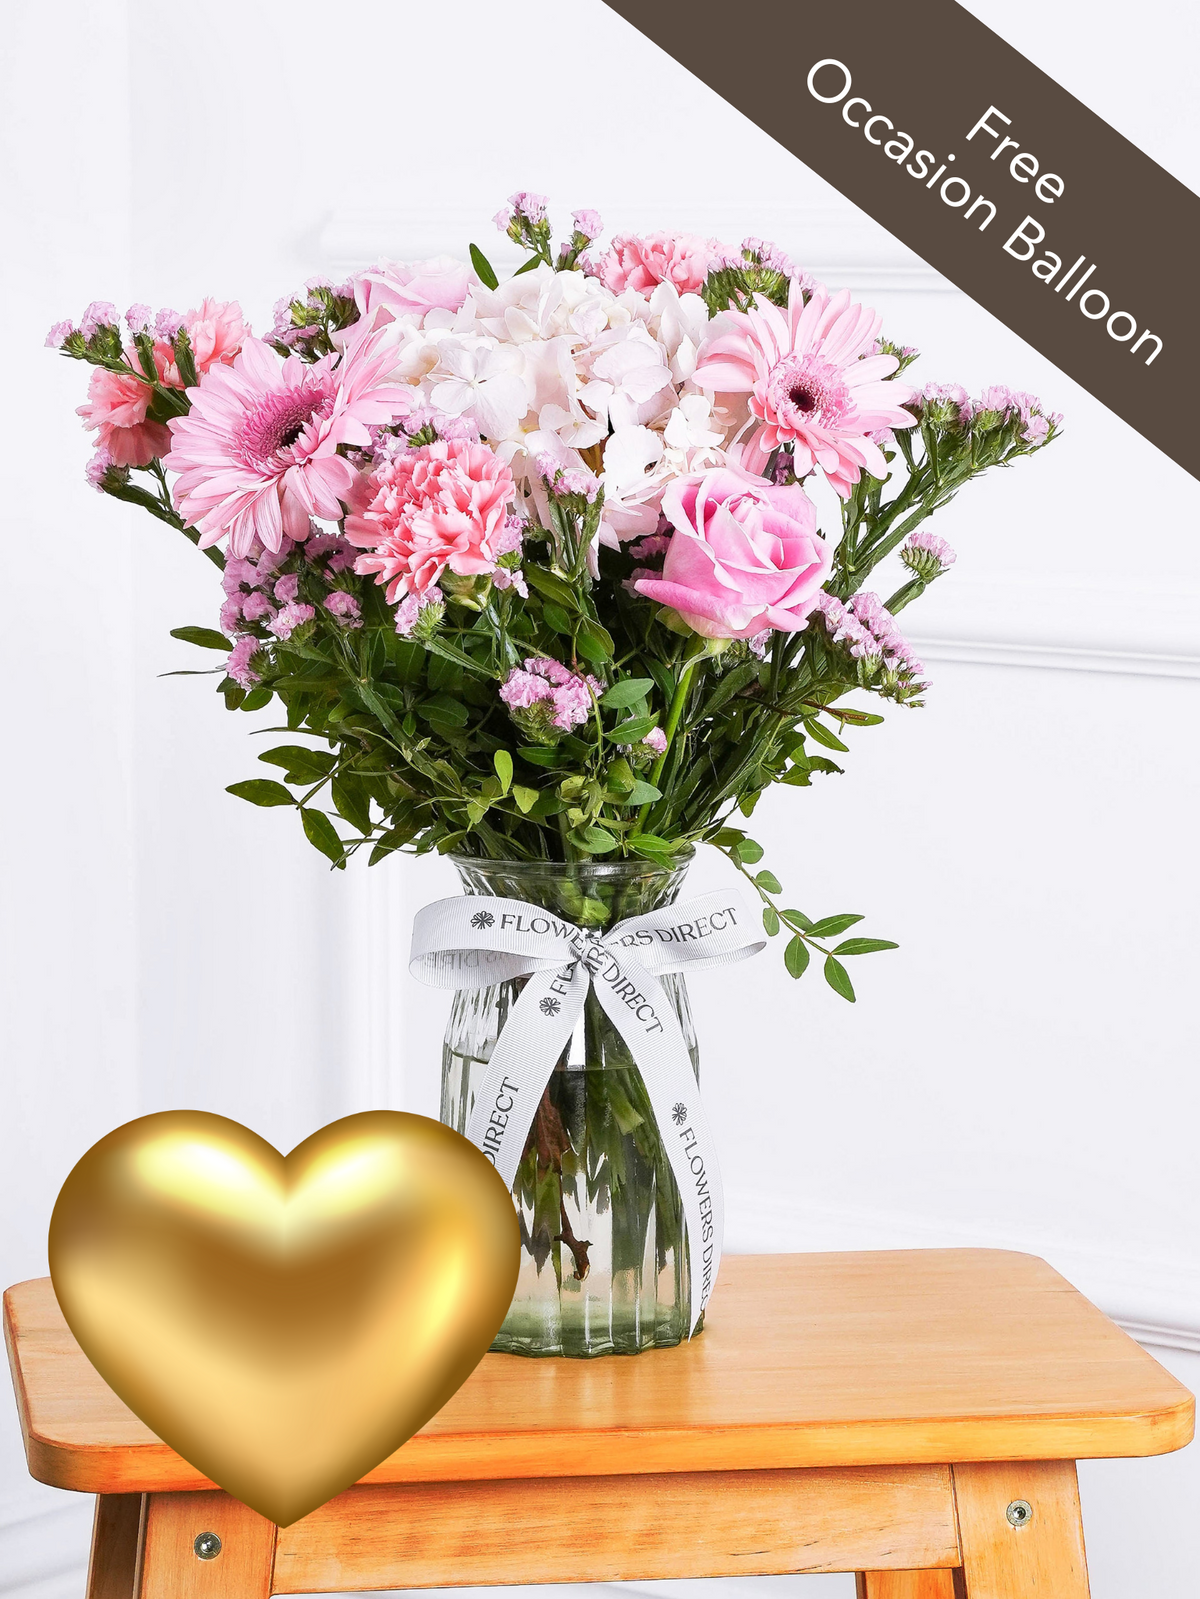 Sweetheart - Vase with Free Balloon to Match the Occasion